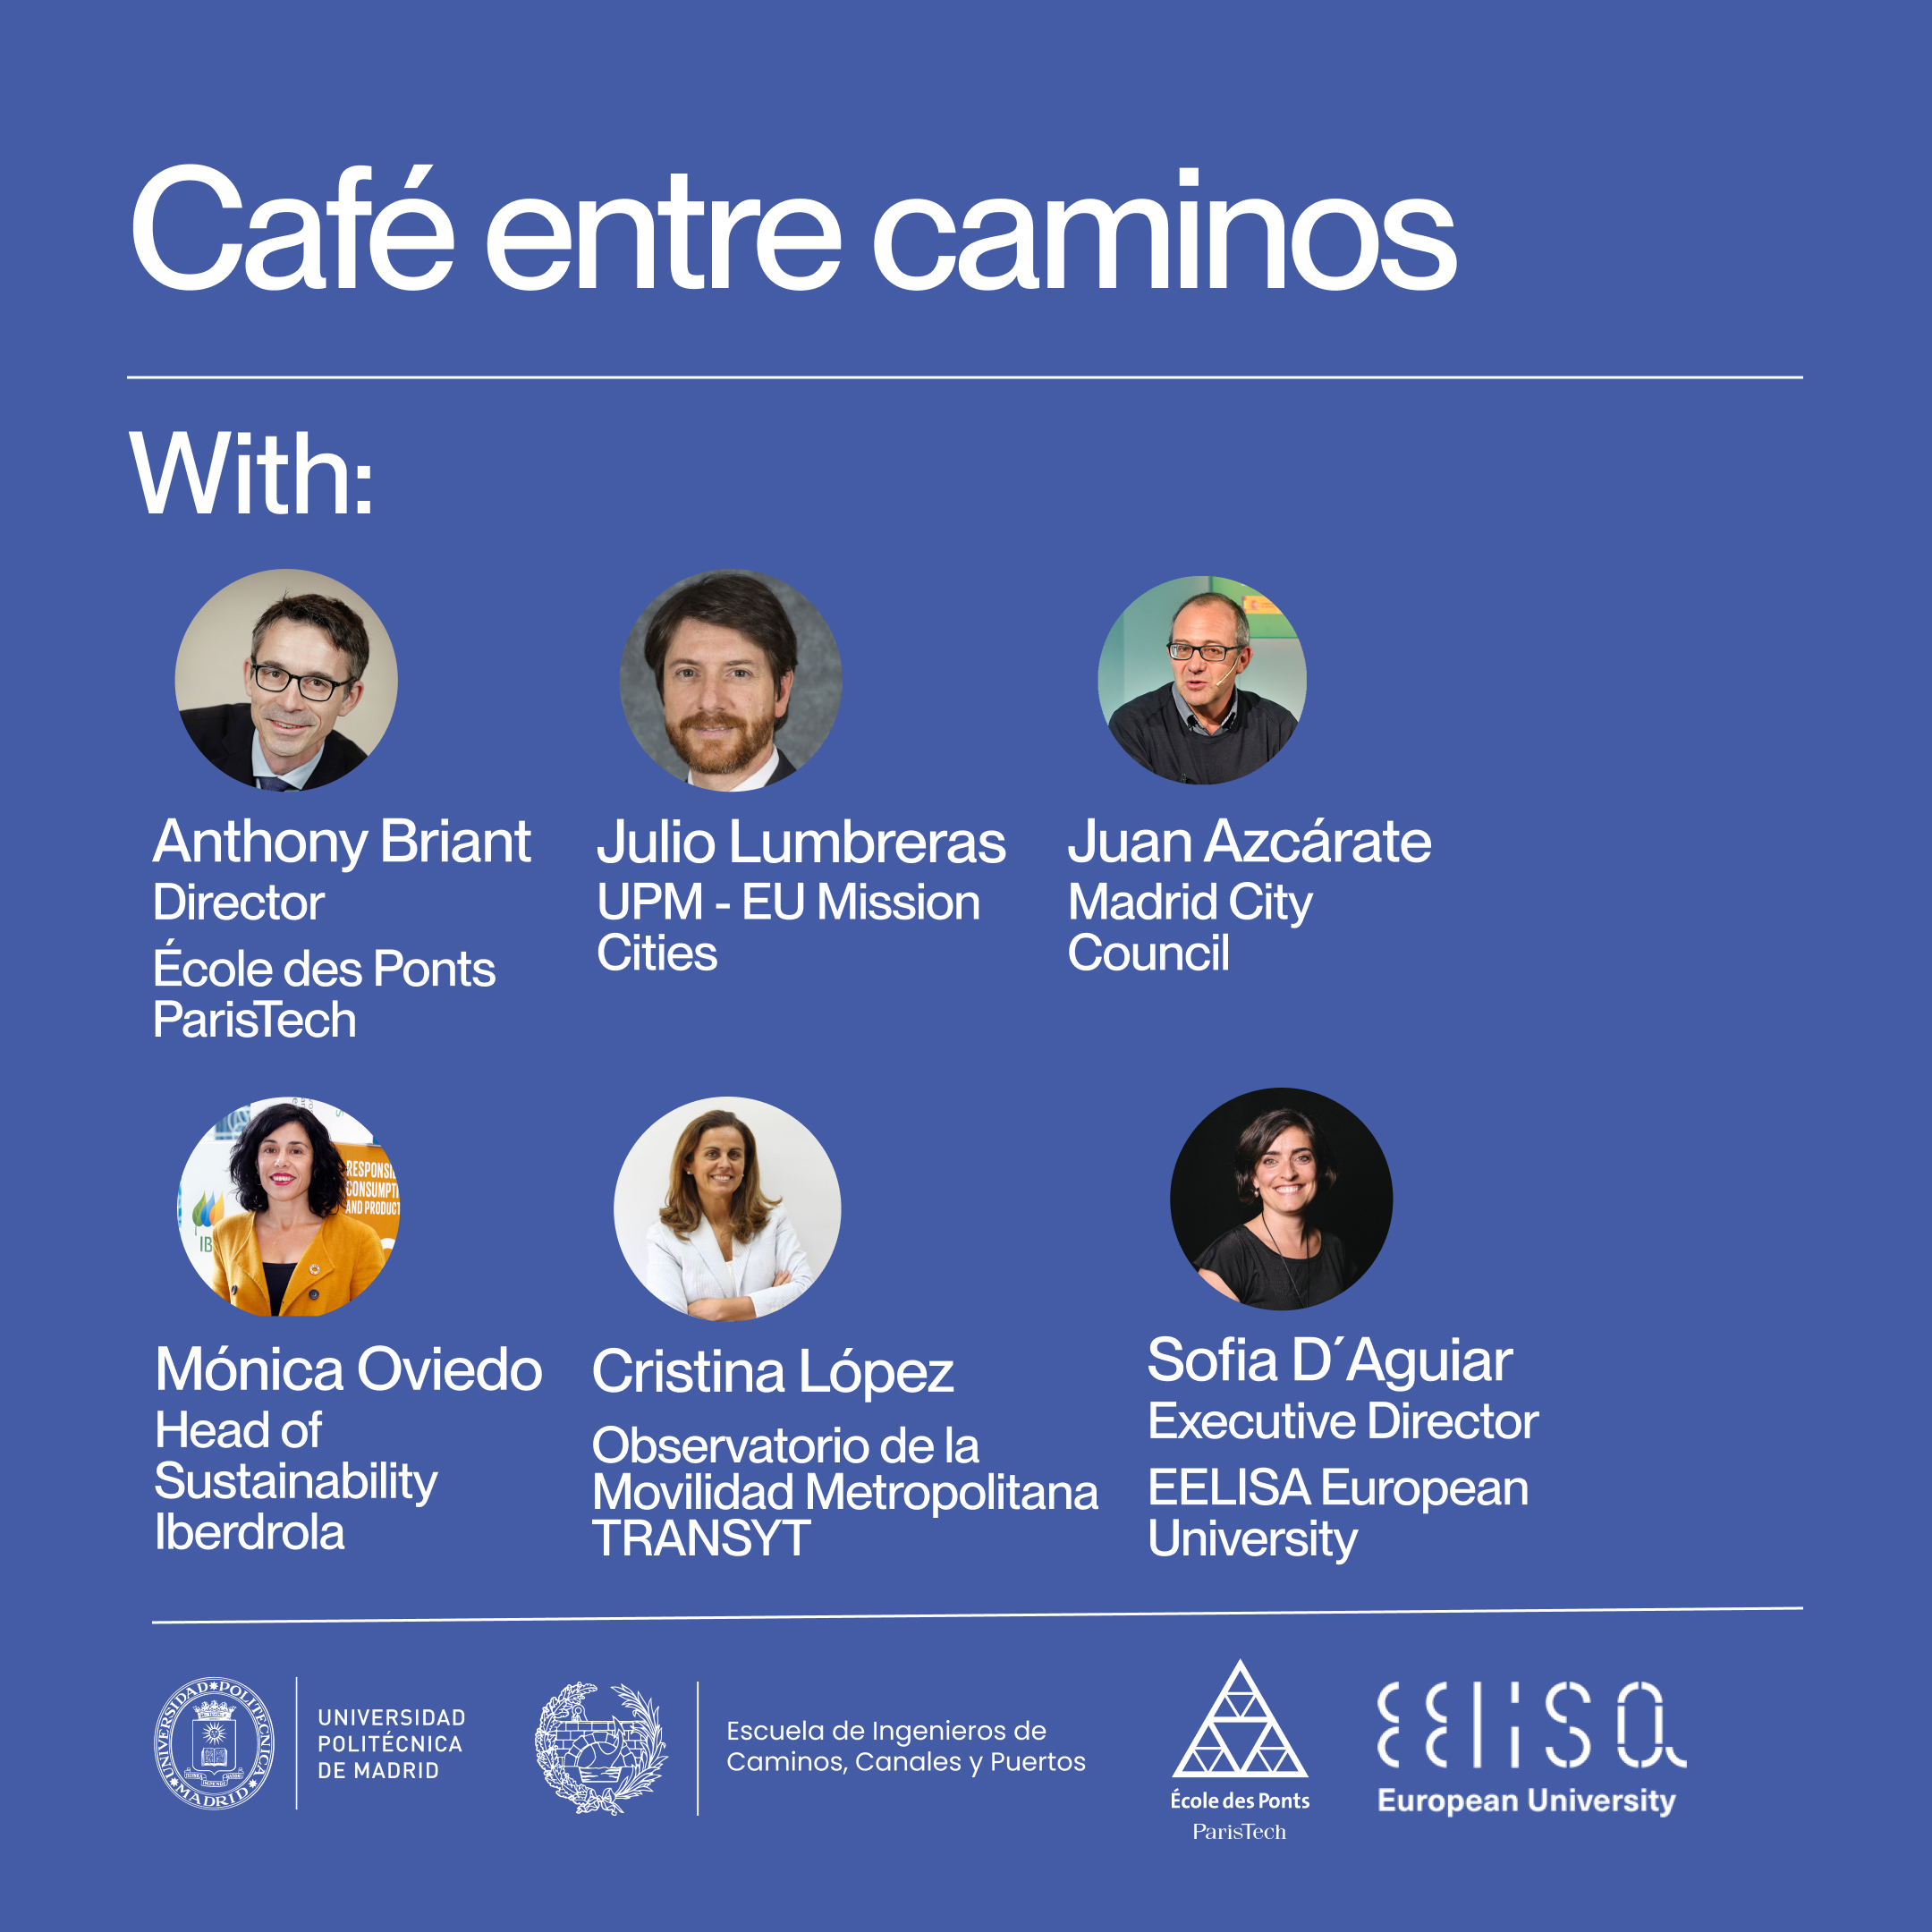 Café entre caminos. Cities & Universities collaboration to foster transition towards climate neutrality: Paris & Madrid.